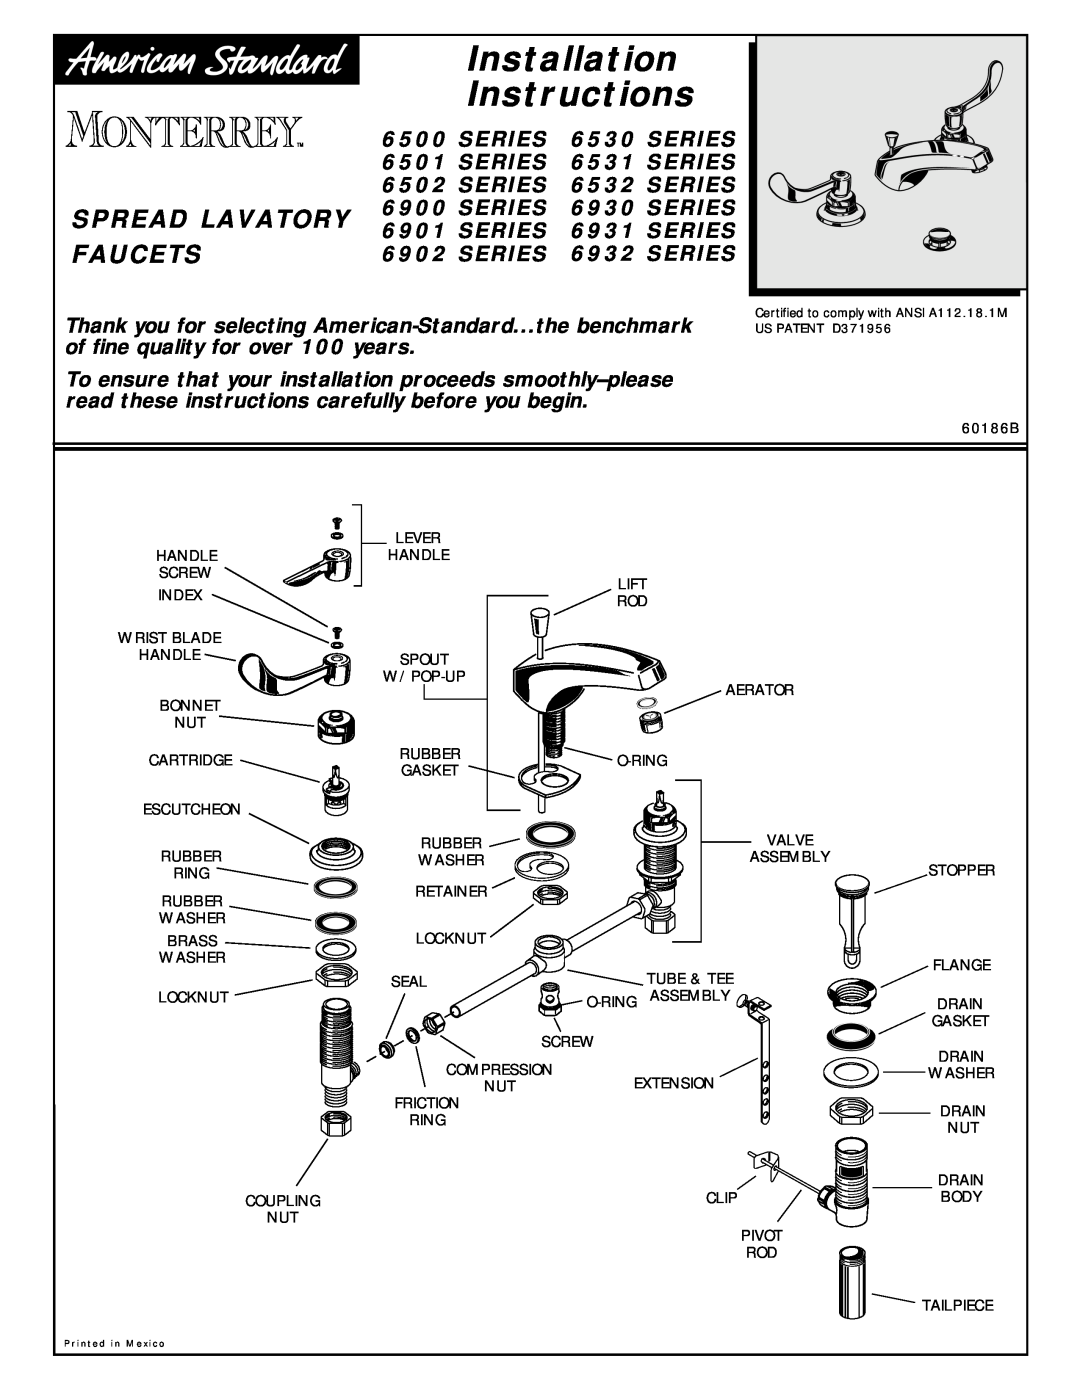 American Standard 6502 Series, 6530 Series installation instructions Installation Instructions, Spread Lavatory Faucets 